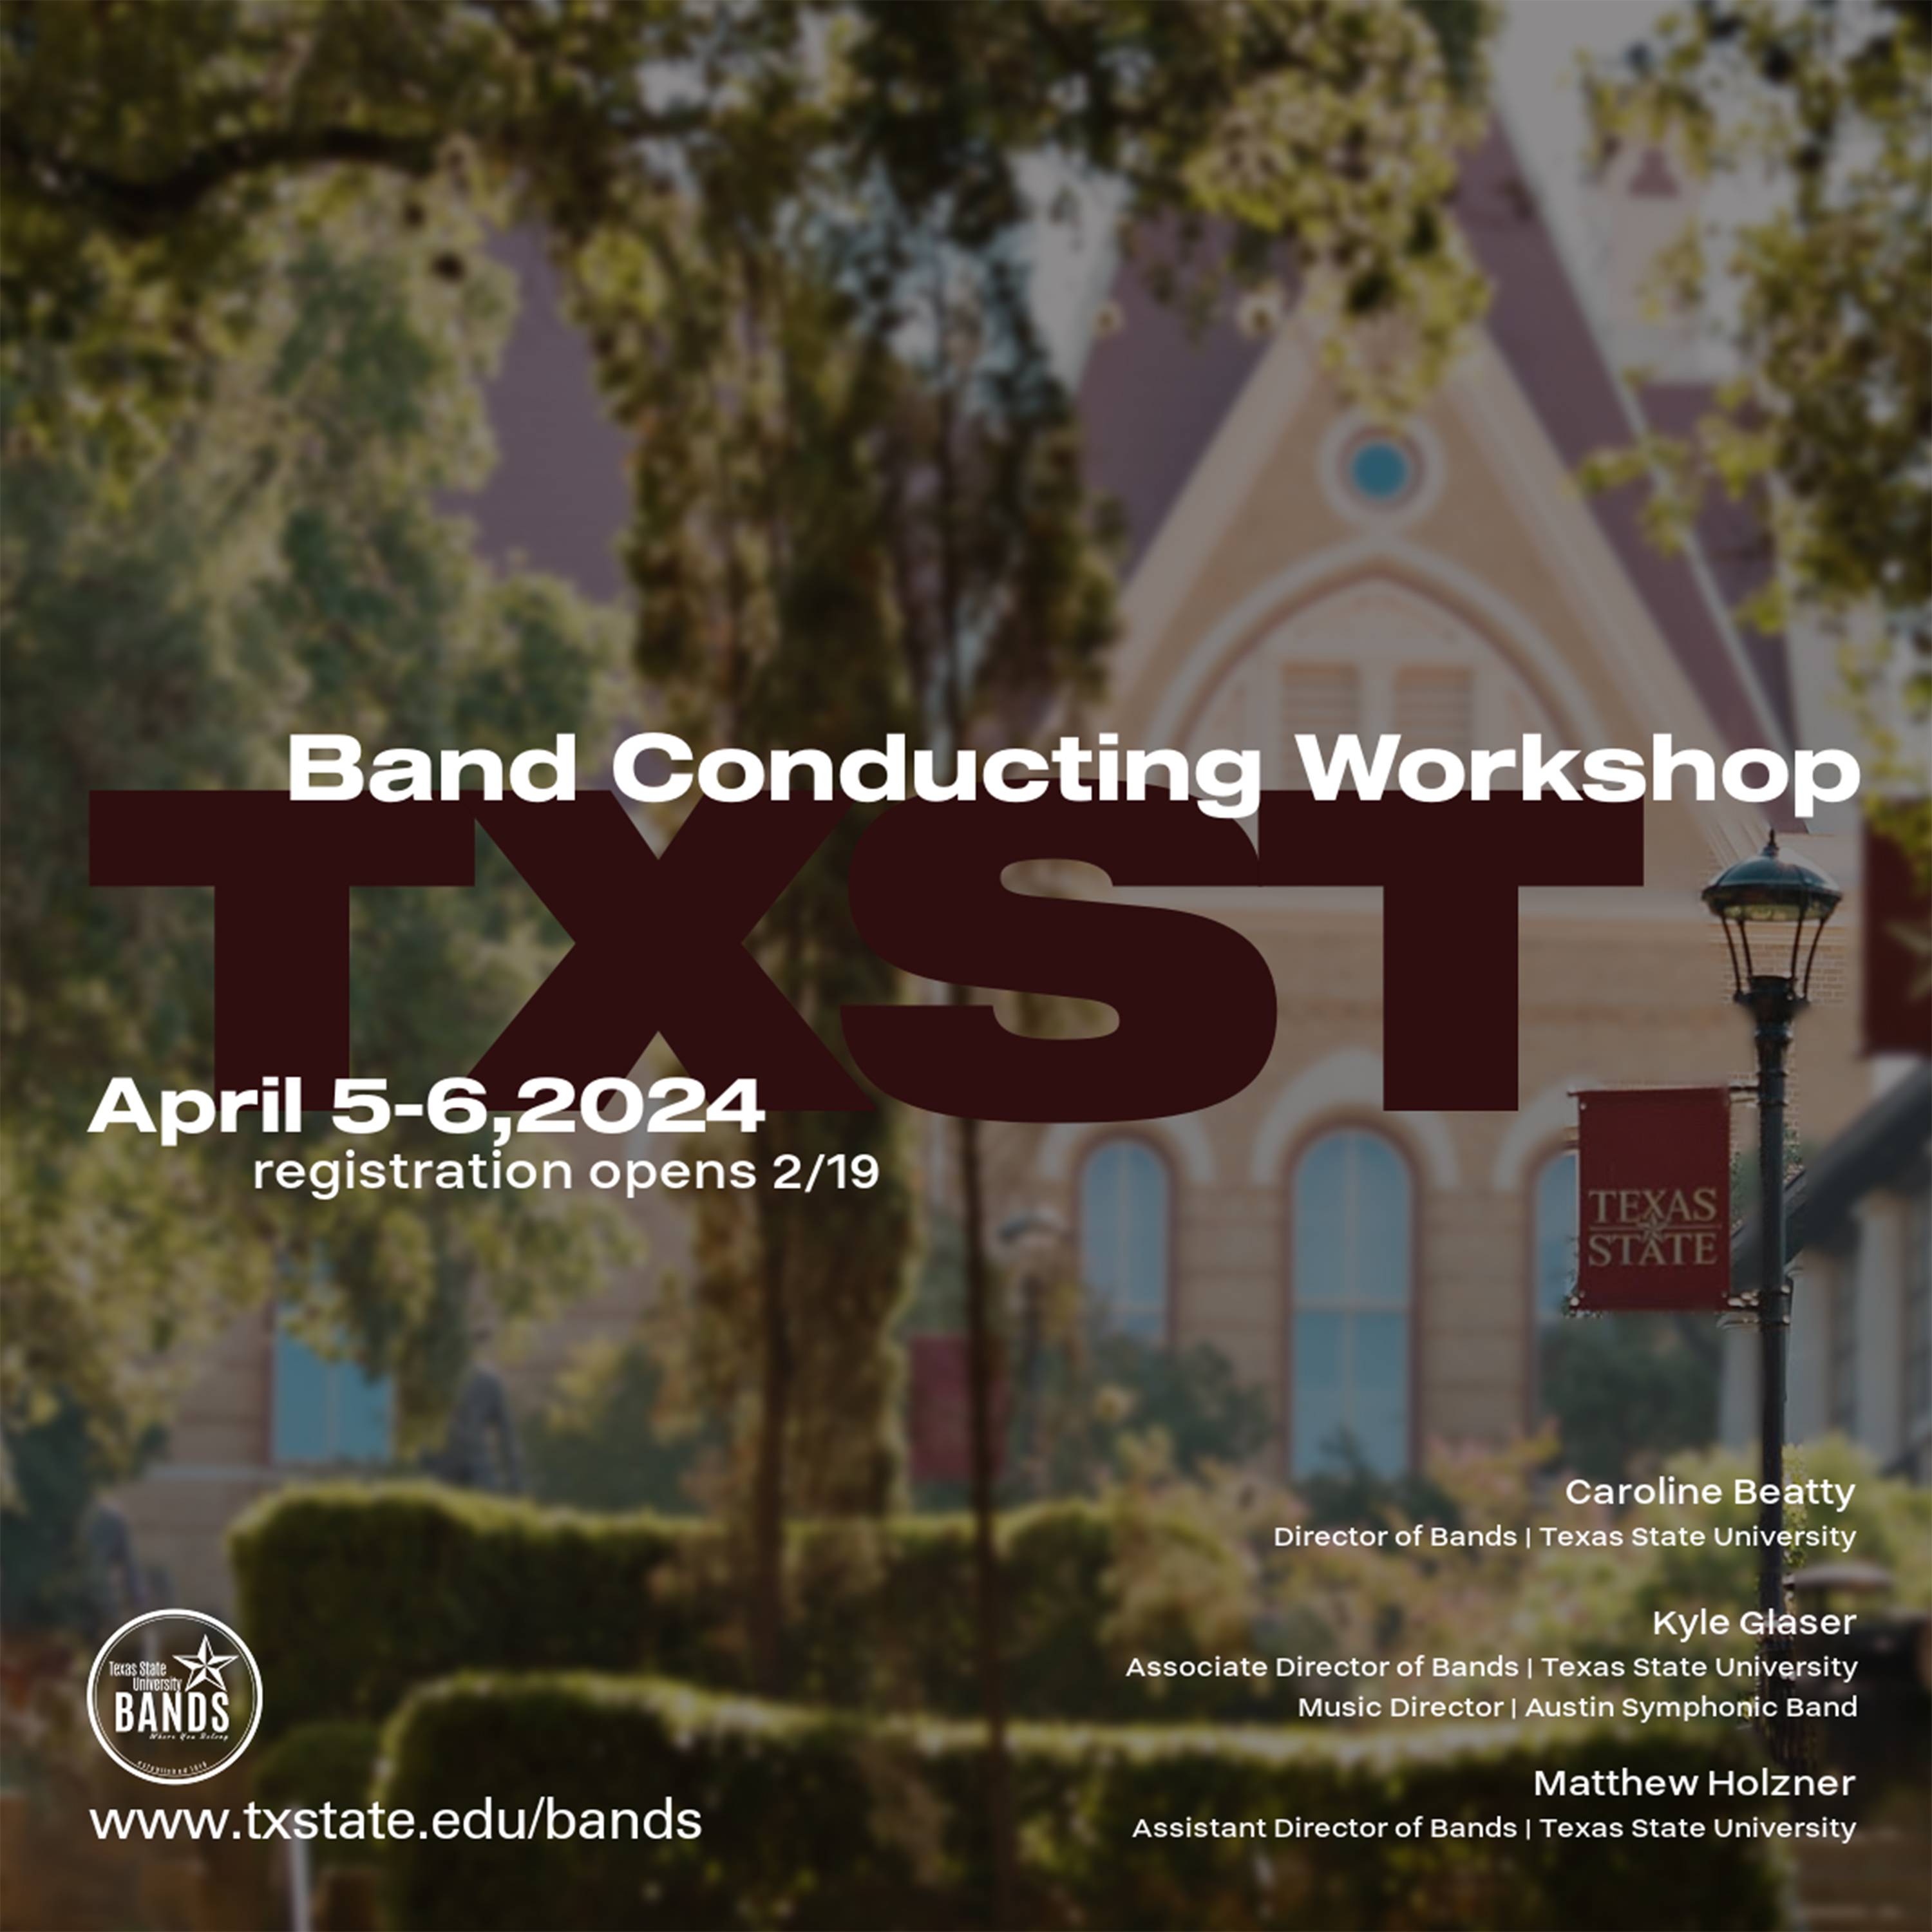 Image of Old Main with Band Conducting Workshop text